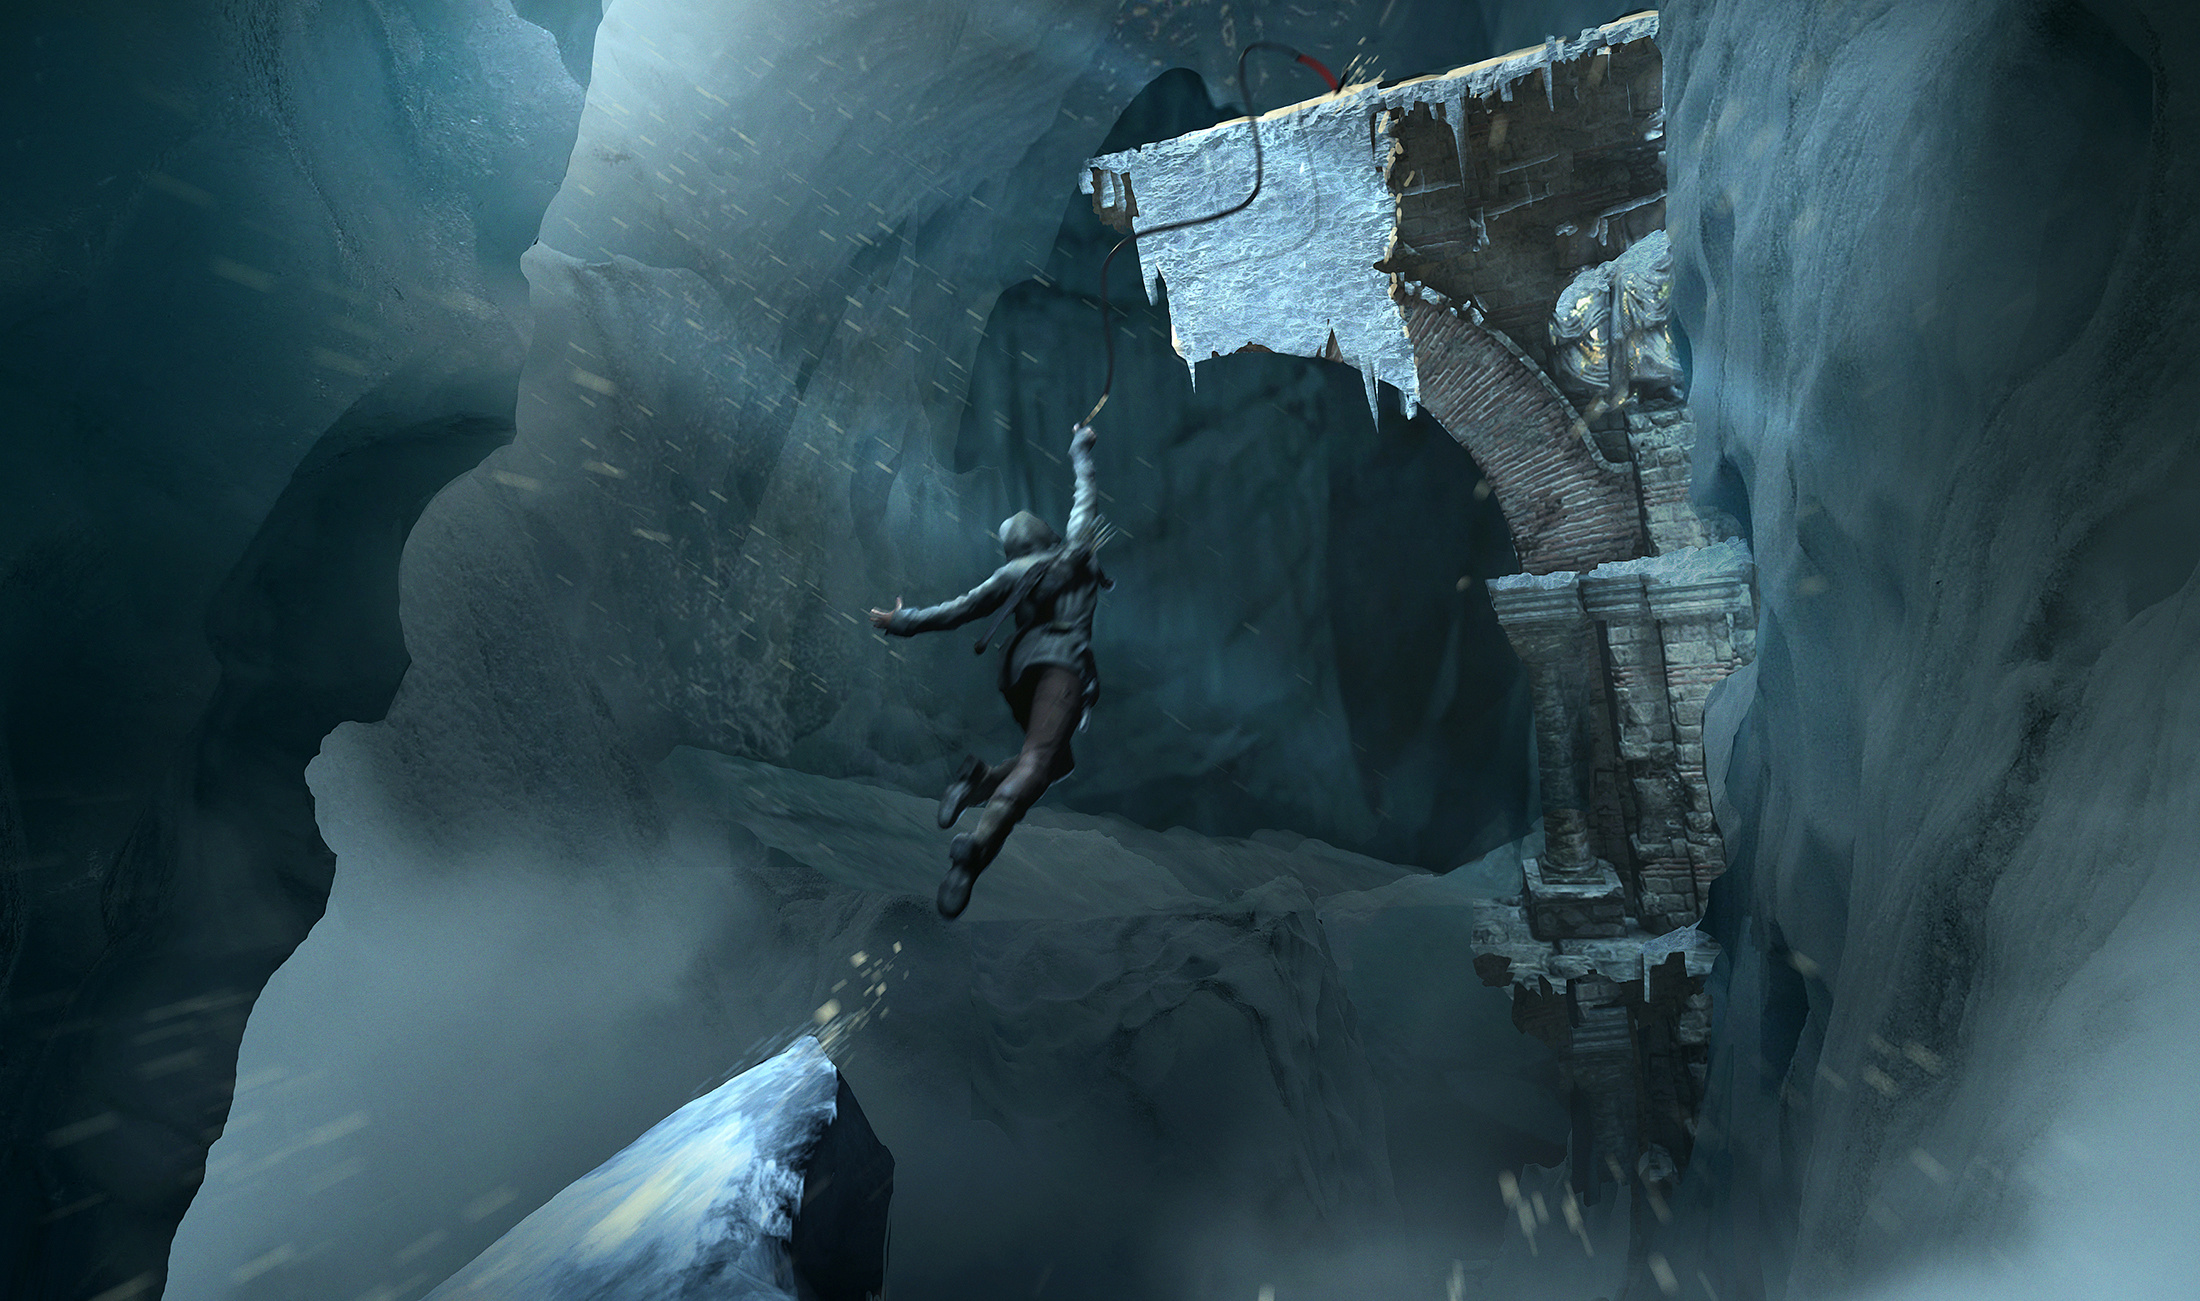 rise of the tomb raider wallpaper,action adventure game,screenshot,cave,glacial landform,adventure game